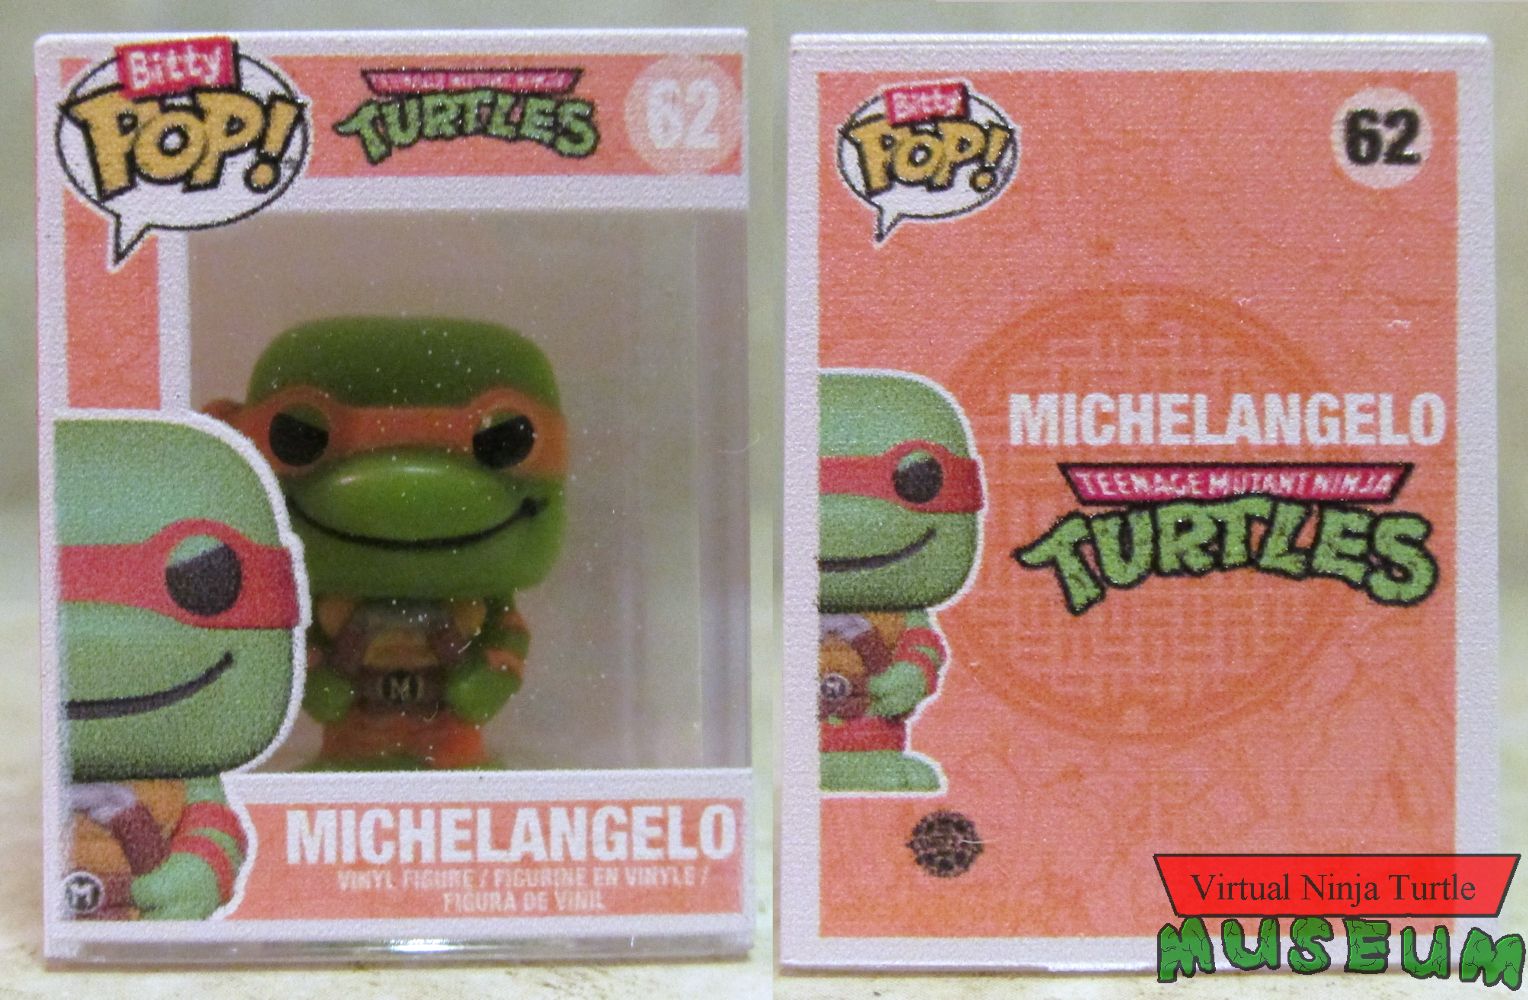 Michelangelo in case front and back